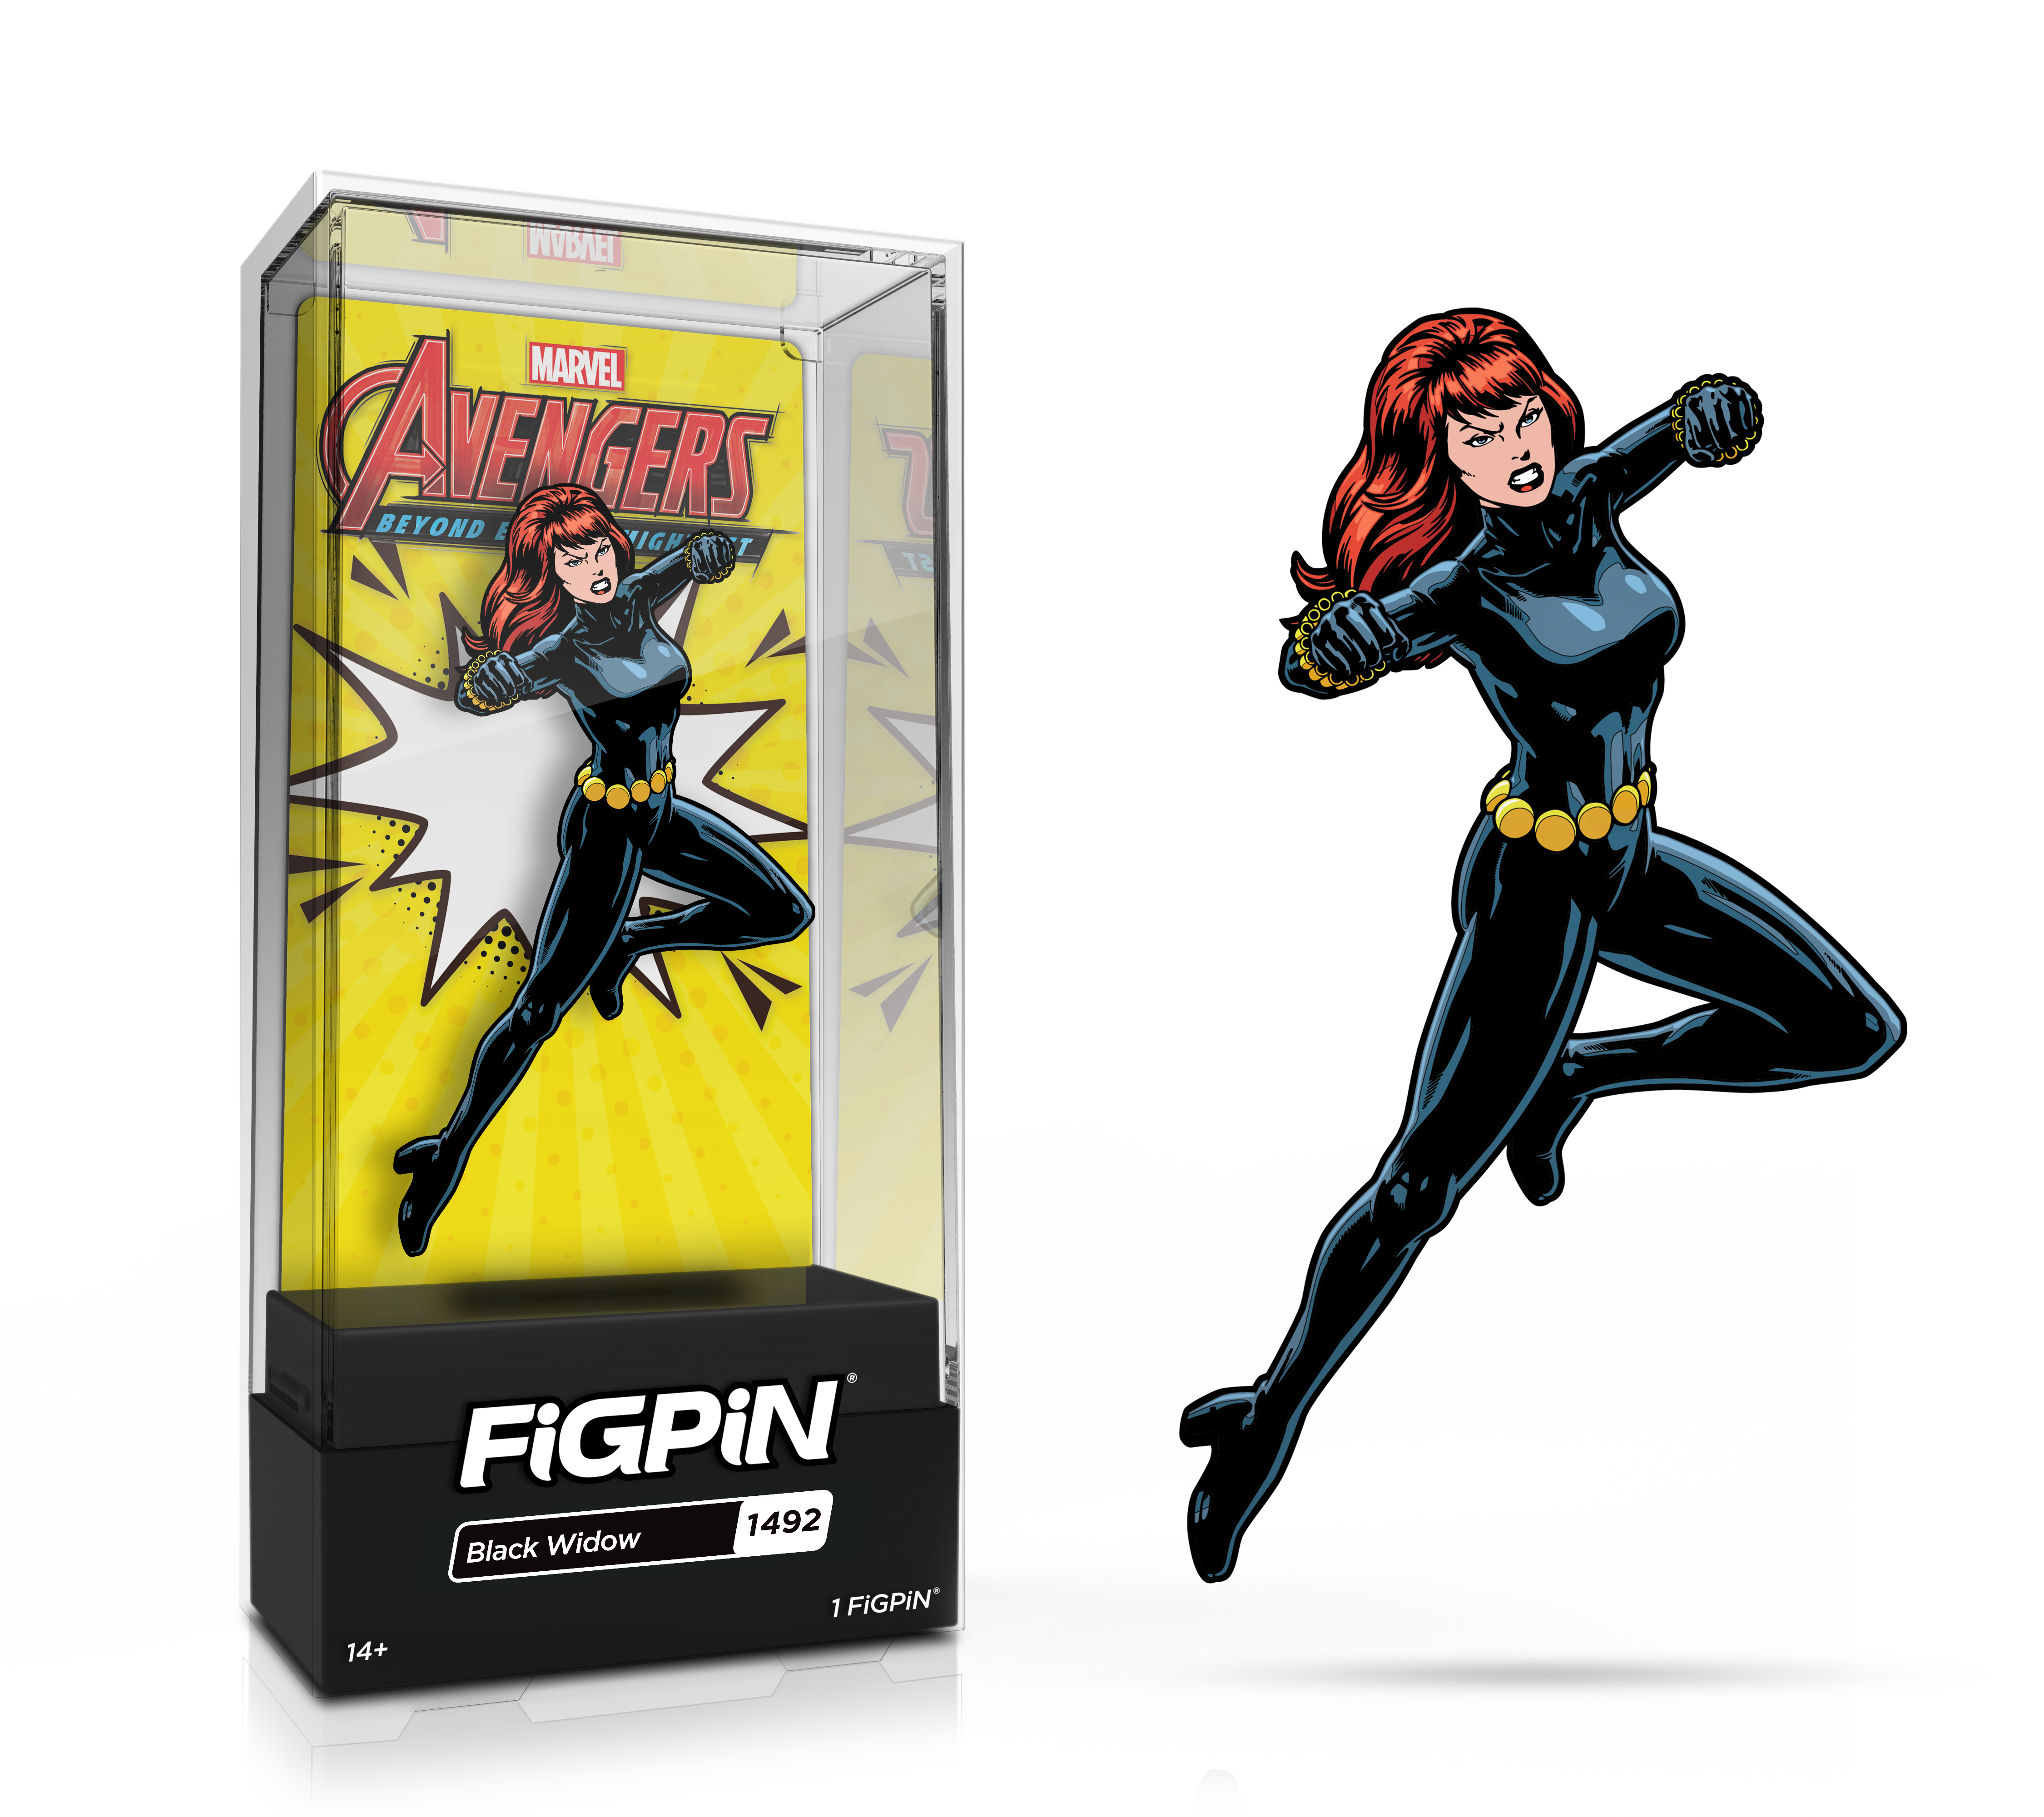 Side by side view of the Black Widow enamel pin in display case and the art render.